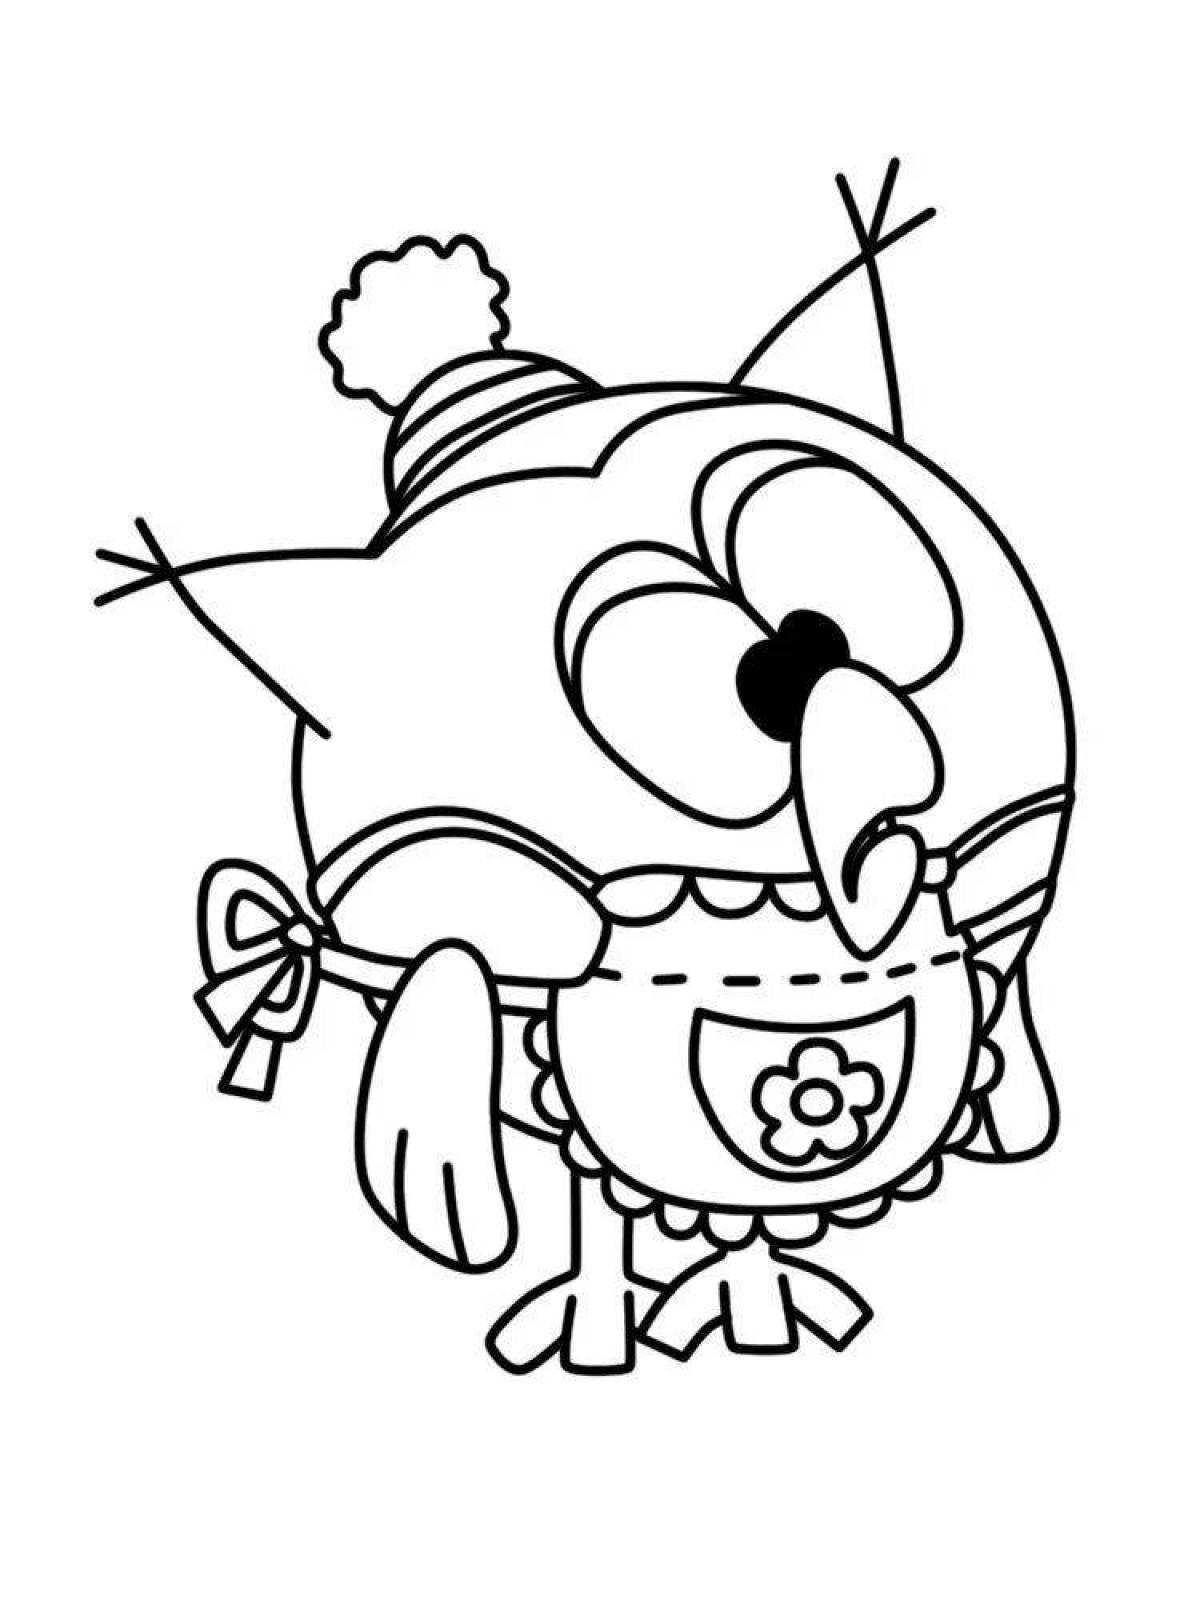 Coloring Pages Smeshariki pandy (39 pcs) - download or print for free ...